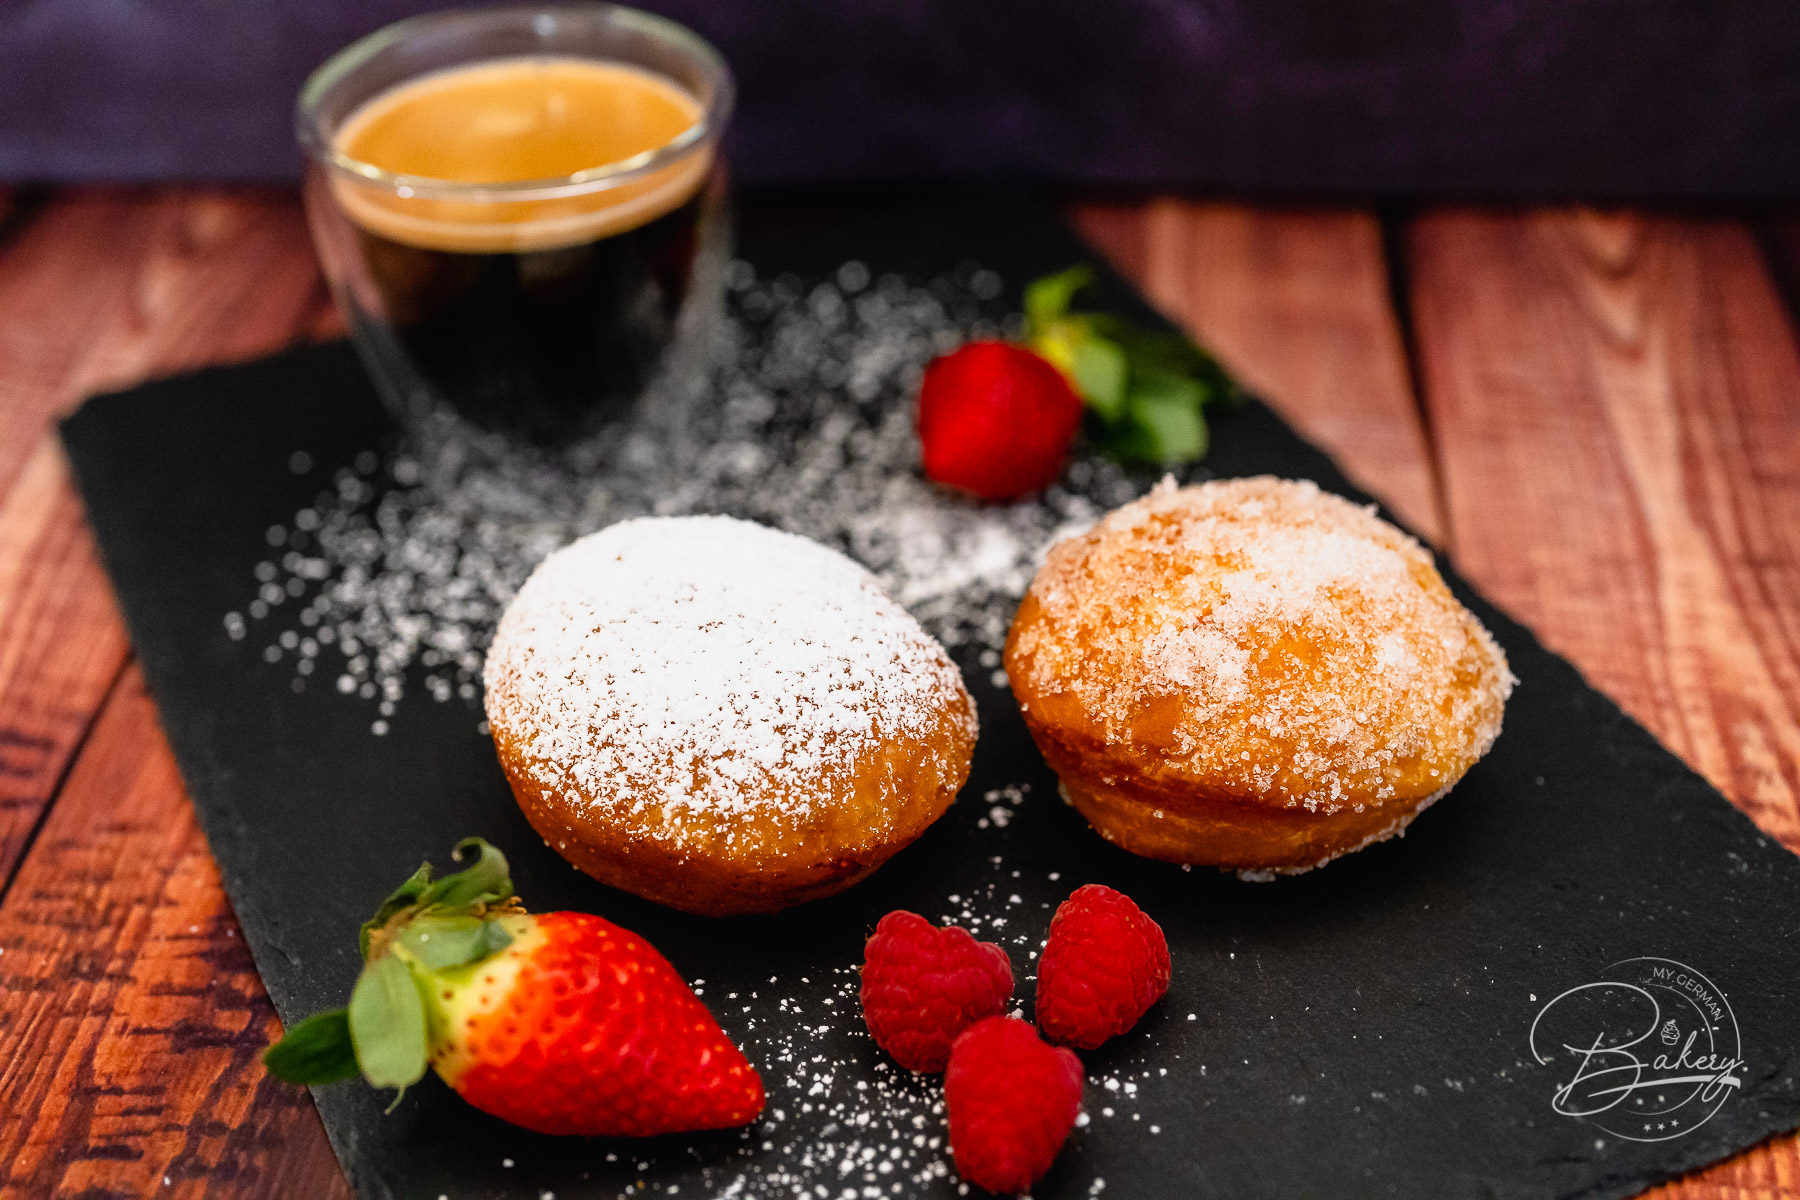 Classic jelly donuts recipe or Bismark Donuts Recipe - Homemade Jelly Doughnuts and Bismark Doughnuts - German Berliner Pfannkuchen recipe to bake in a pan. Jelly donuts with yeast and oil. Filled with jam or custard.